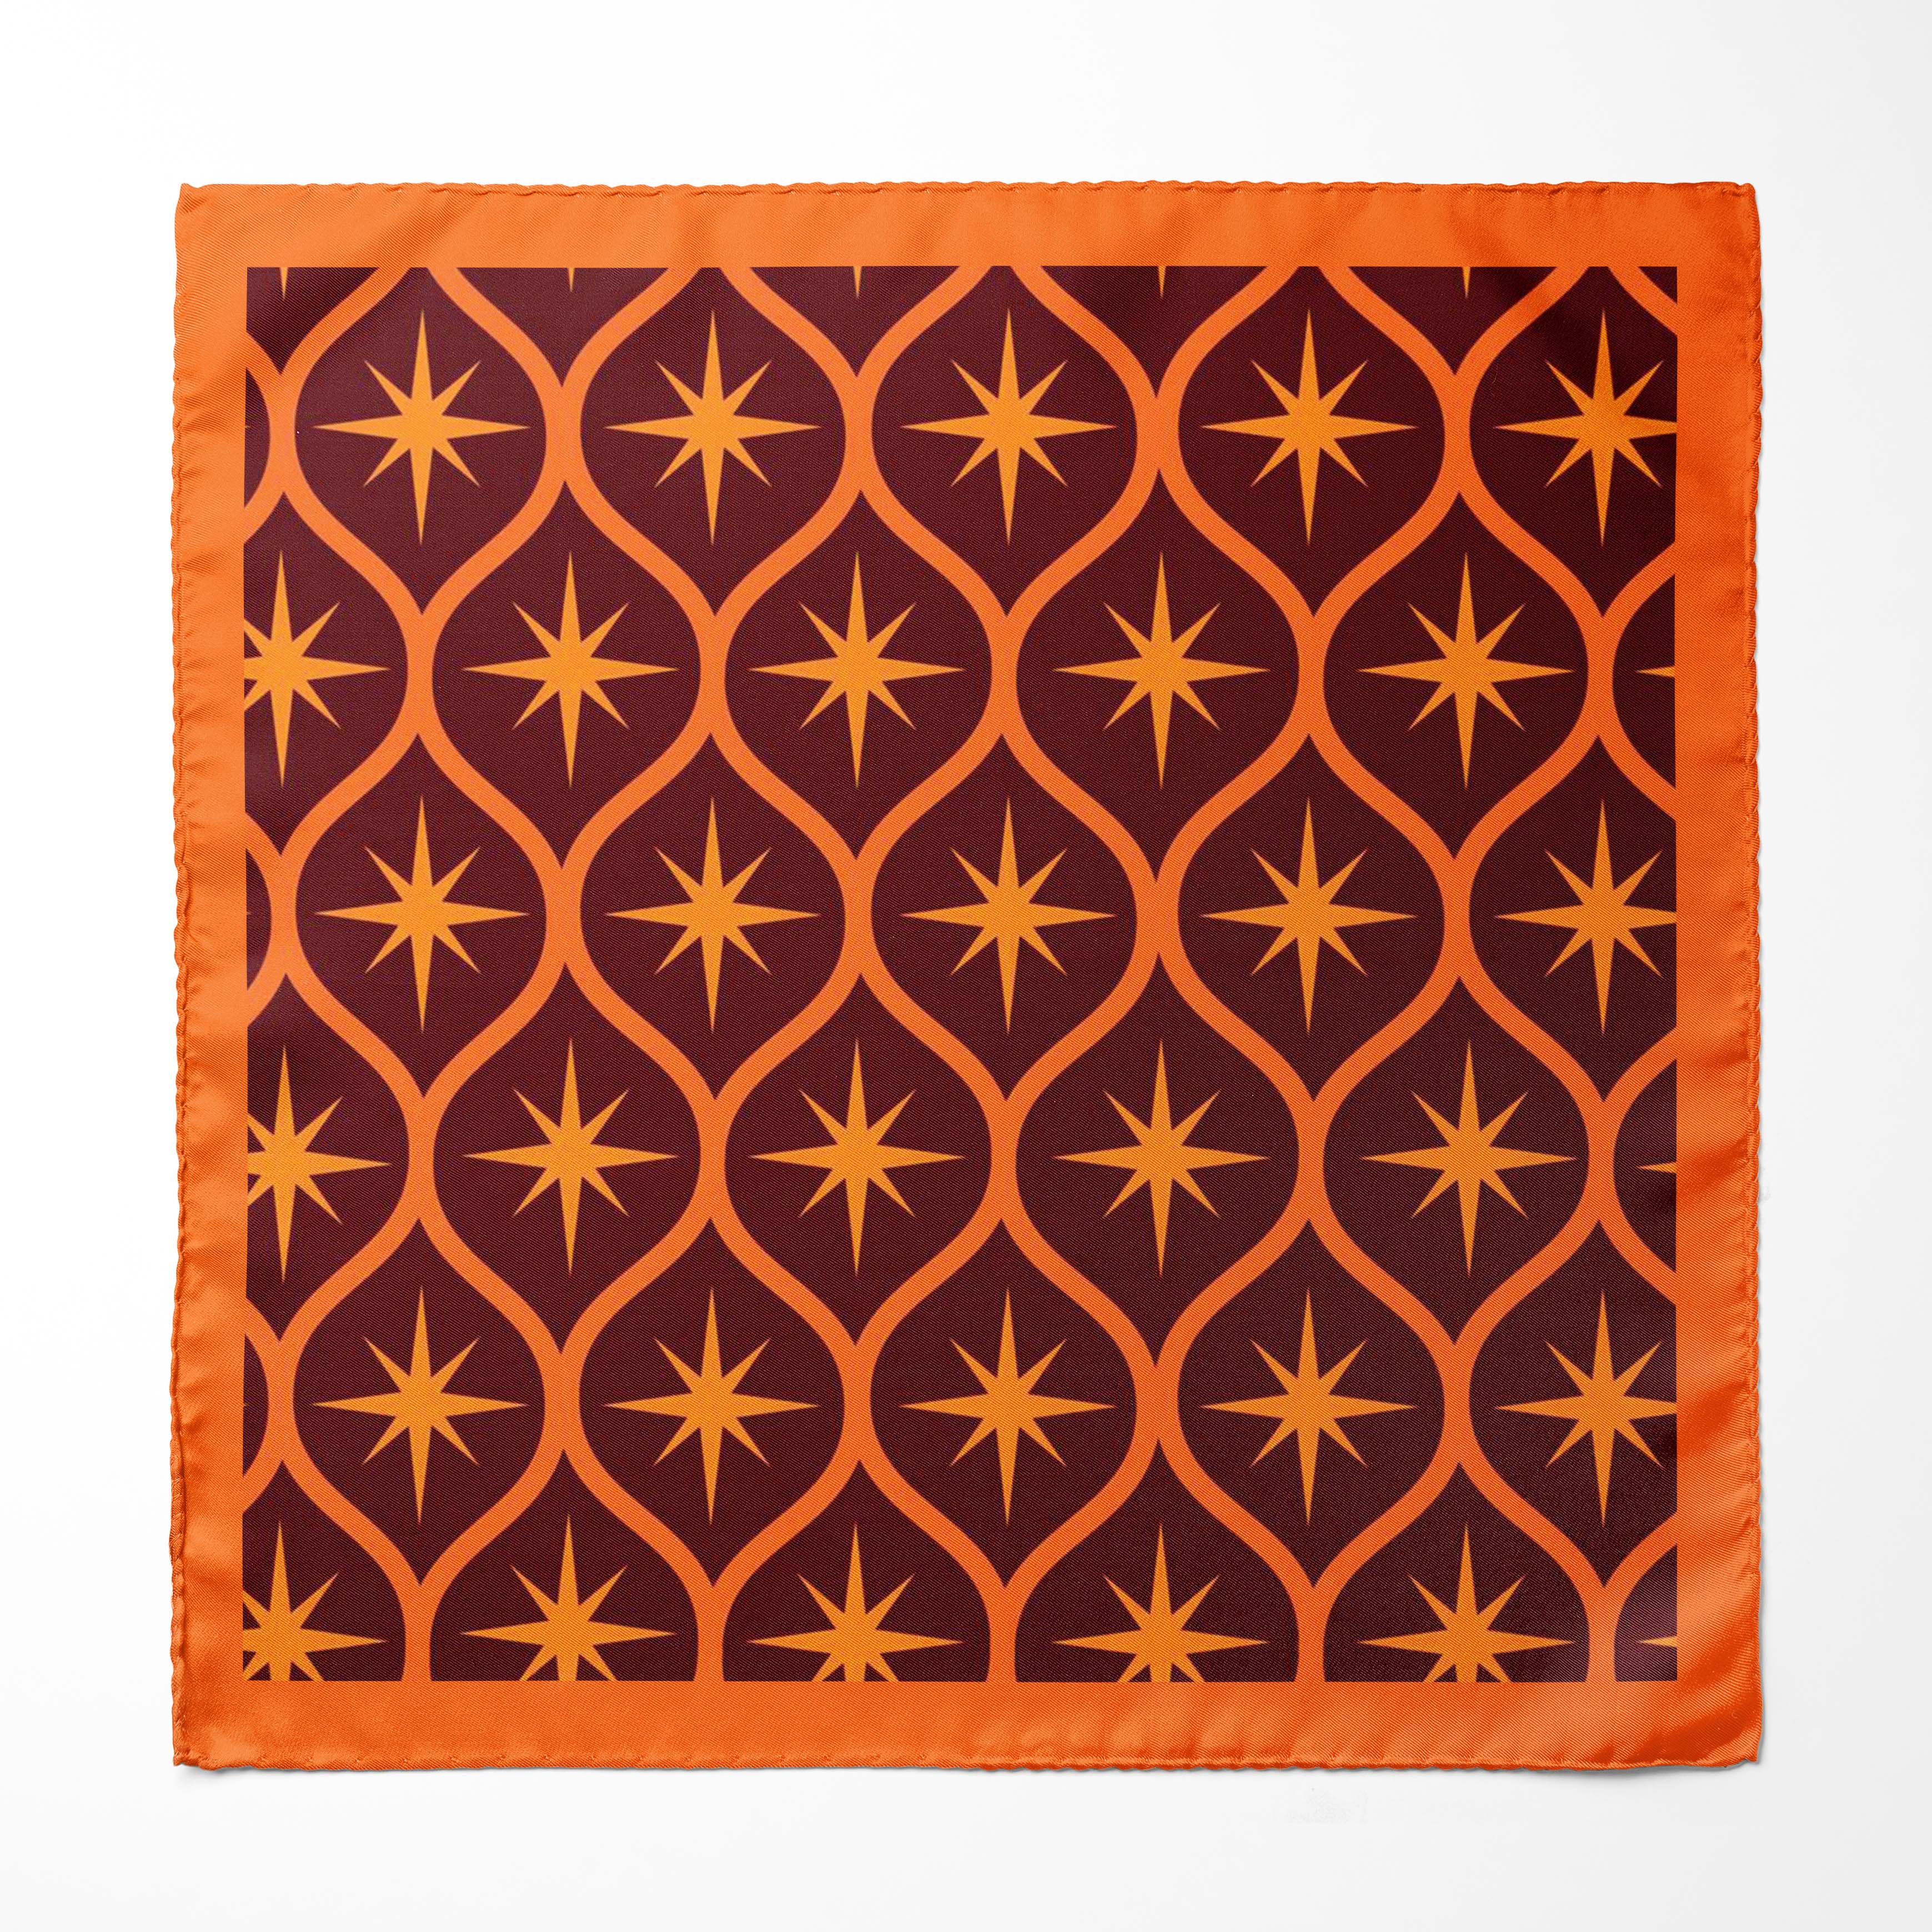 ORANGE ATOMIC SILK SCARF WITH LAPEL PIN AND POCKET SQUARE